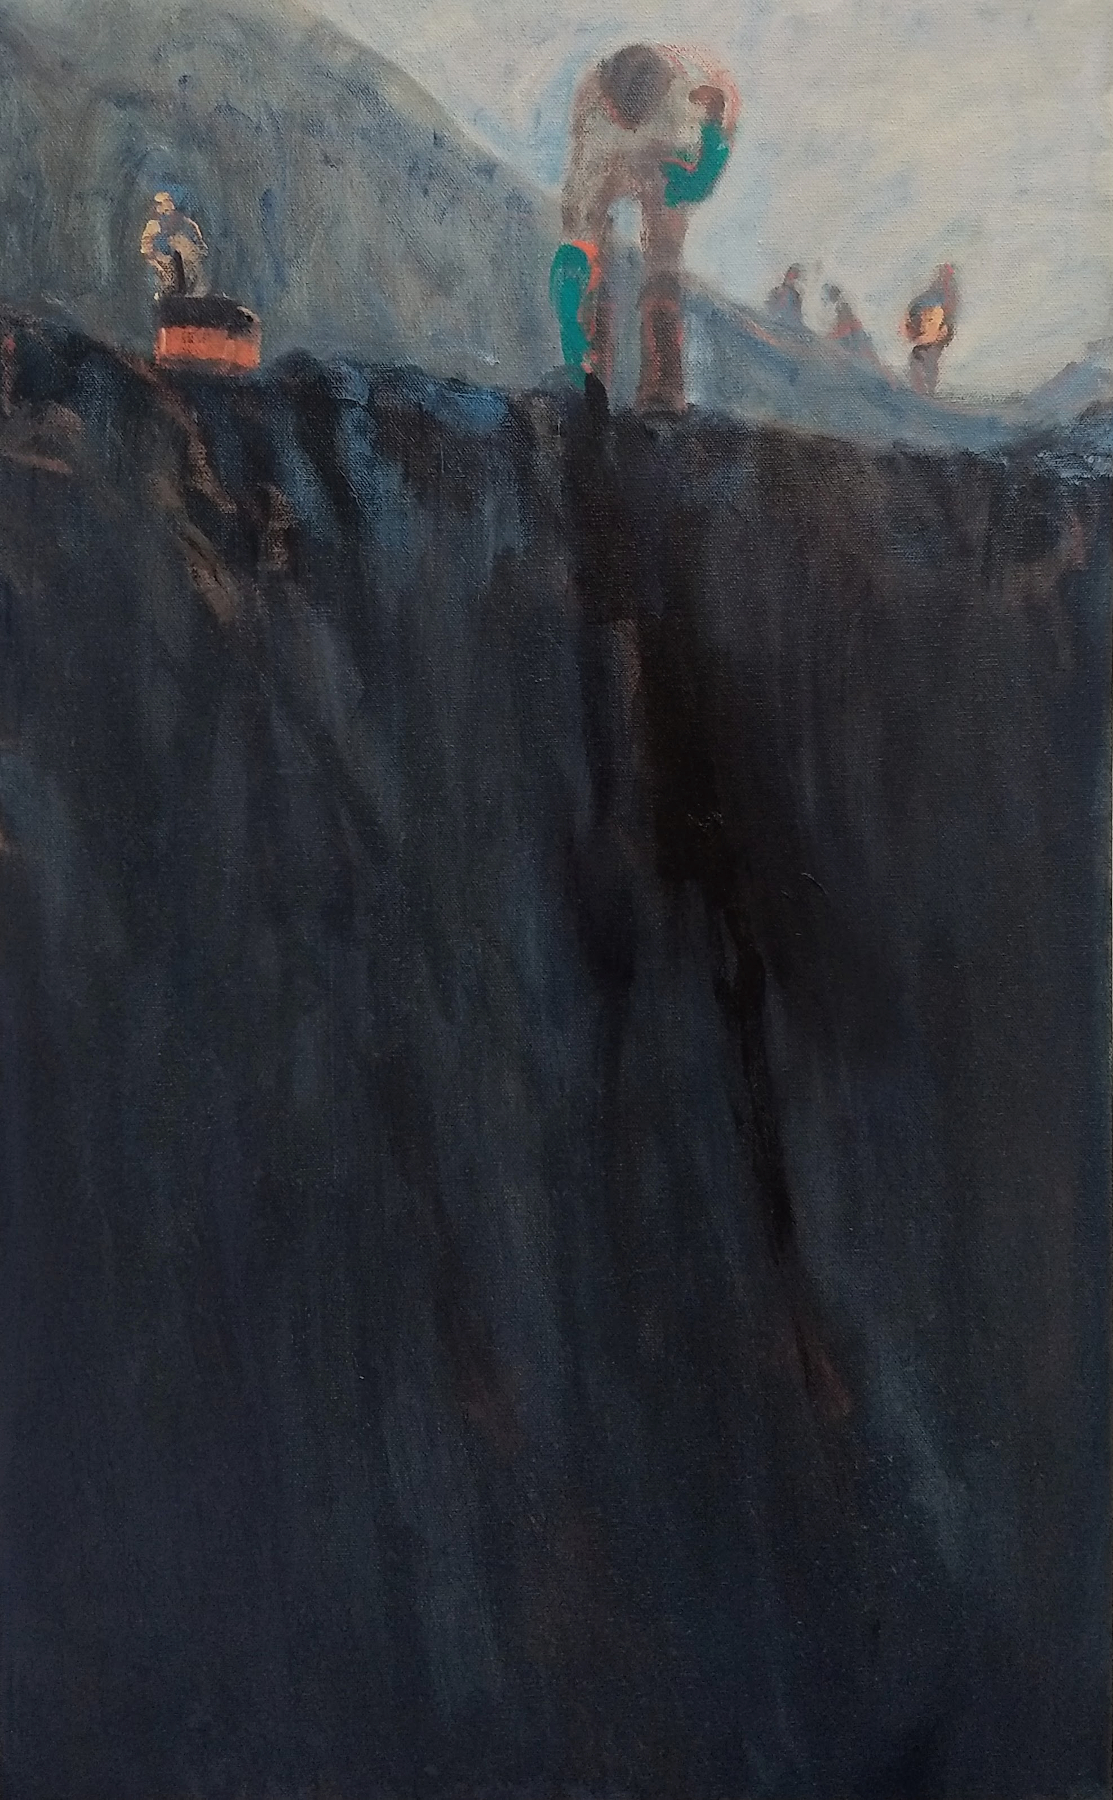 'On The Cliff', Marcia Teusink, Oil on canvas, 75 x 45 cm